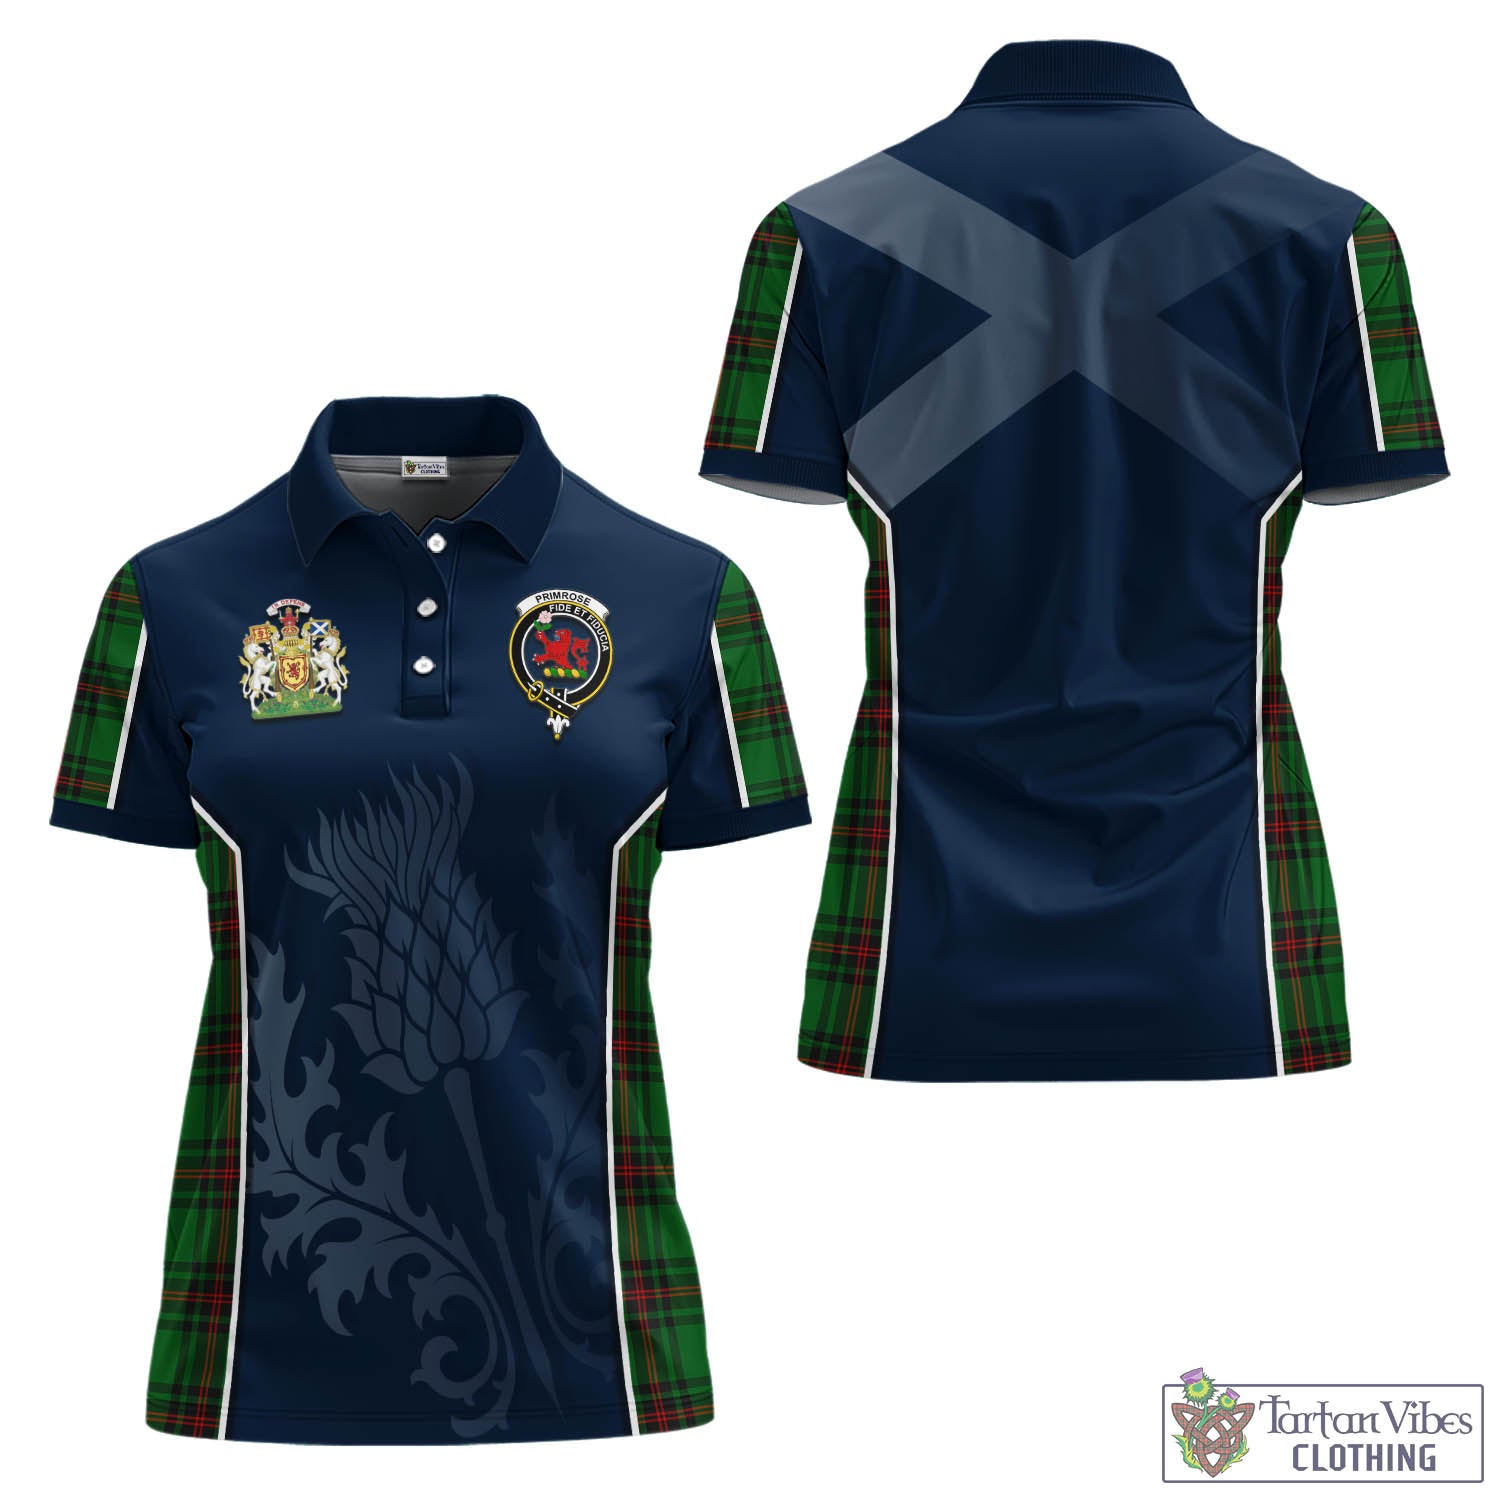 Tartan Vibes Clothing Primrose Tartan Women's Polo Shirt with Family Crest and Scottish Thistle Vibes Sport Style